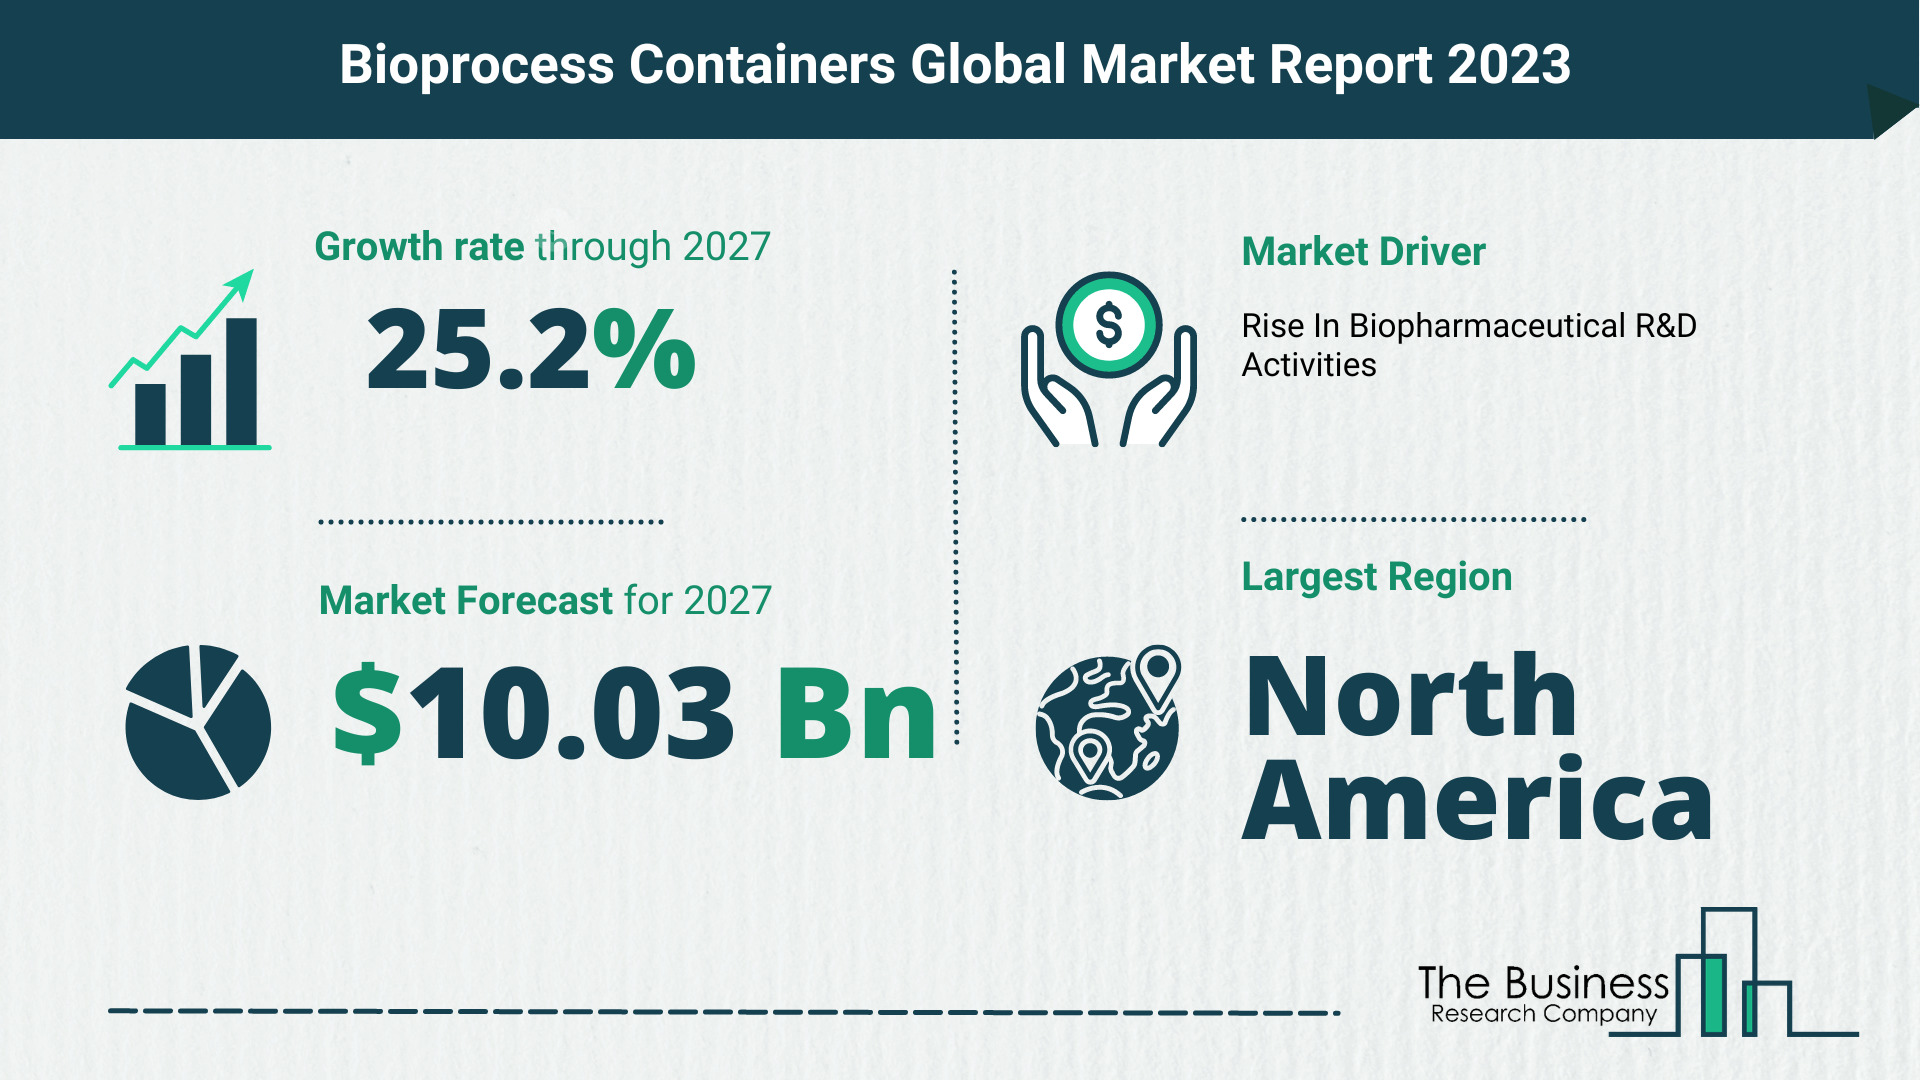 bioprocess containers market